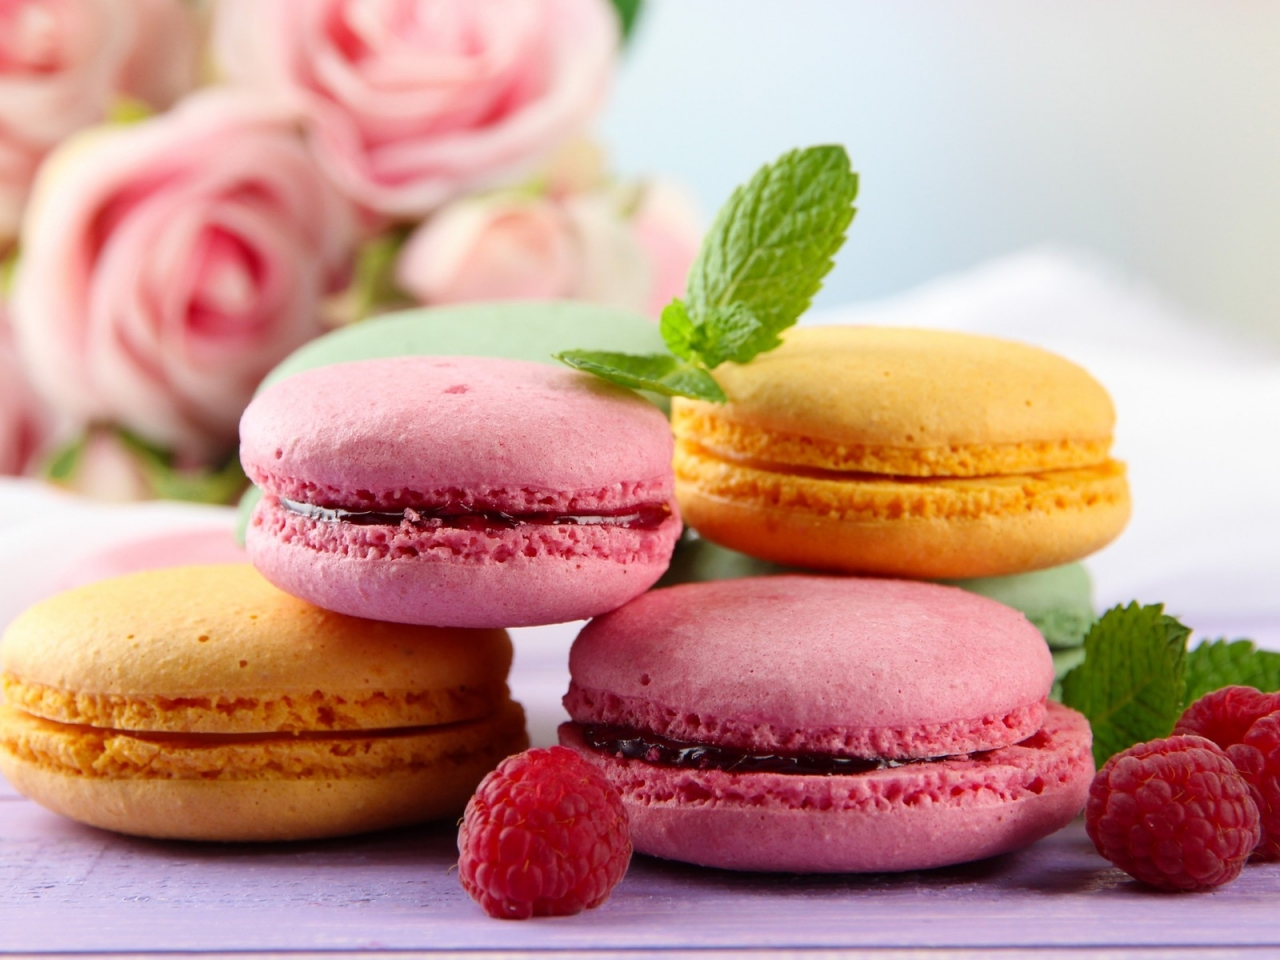 Tasty Macaroons for 1280 x 960 resolution